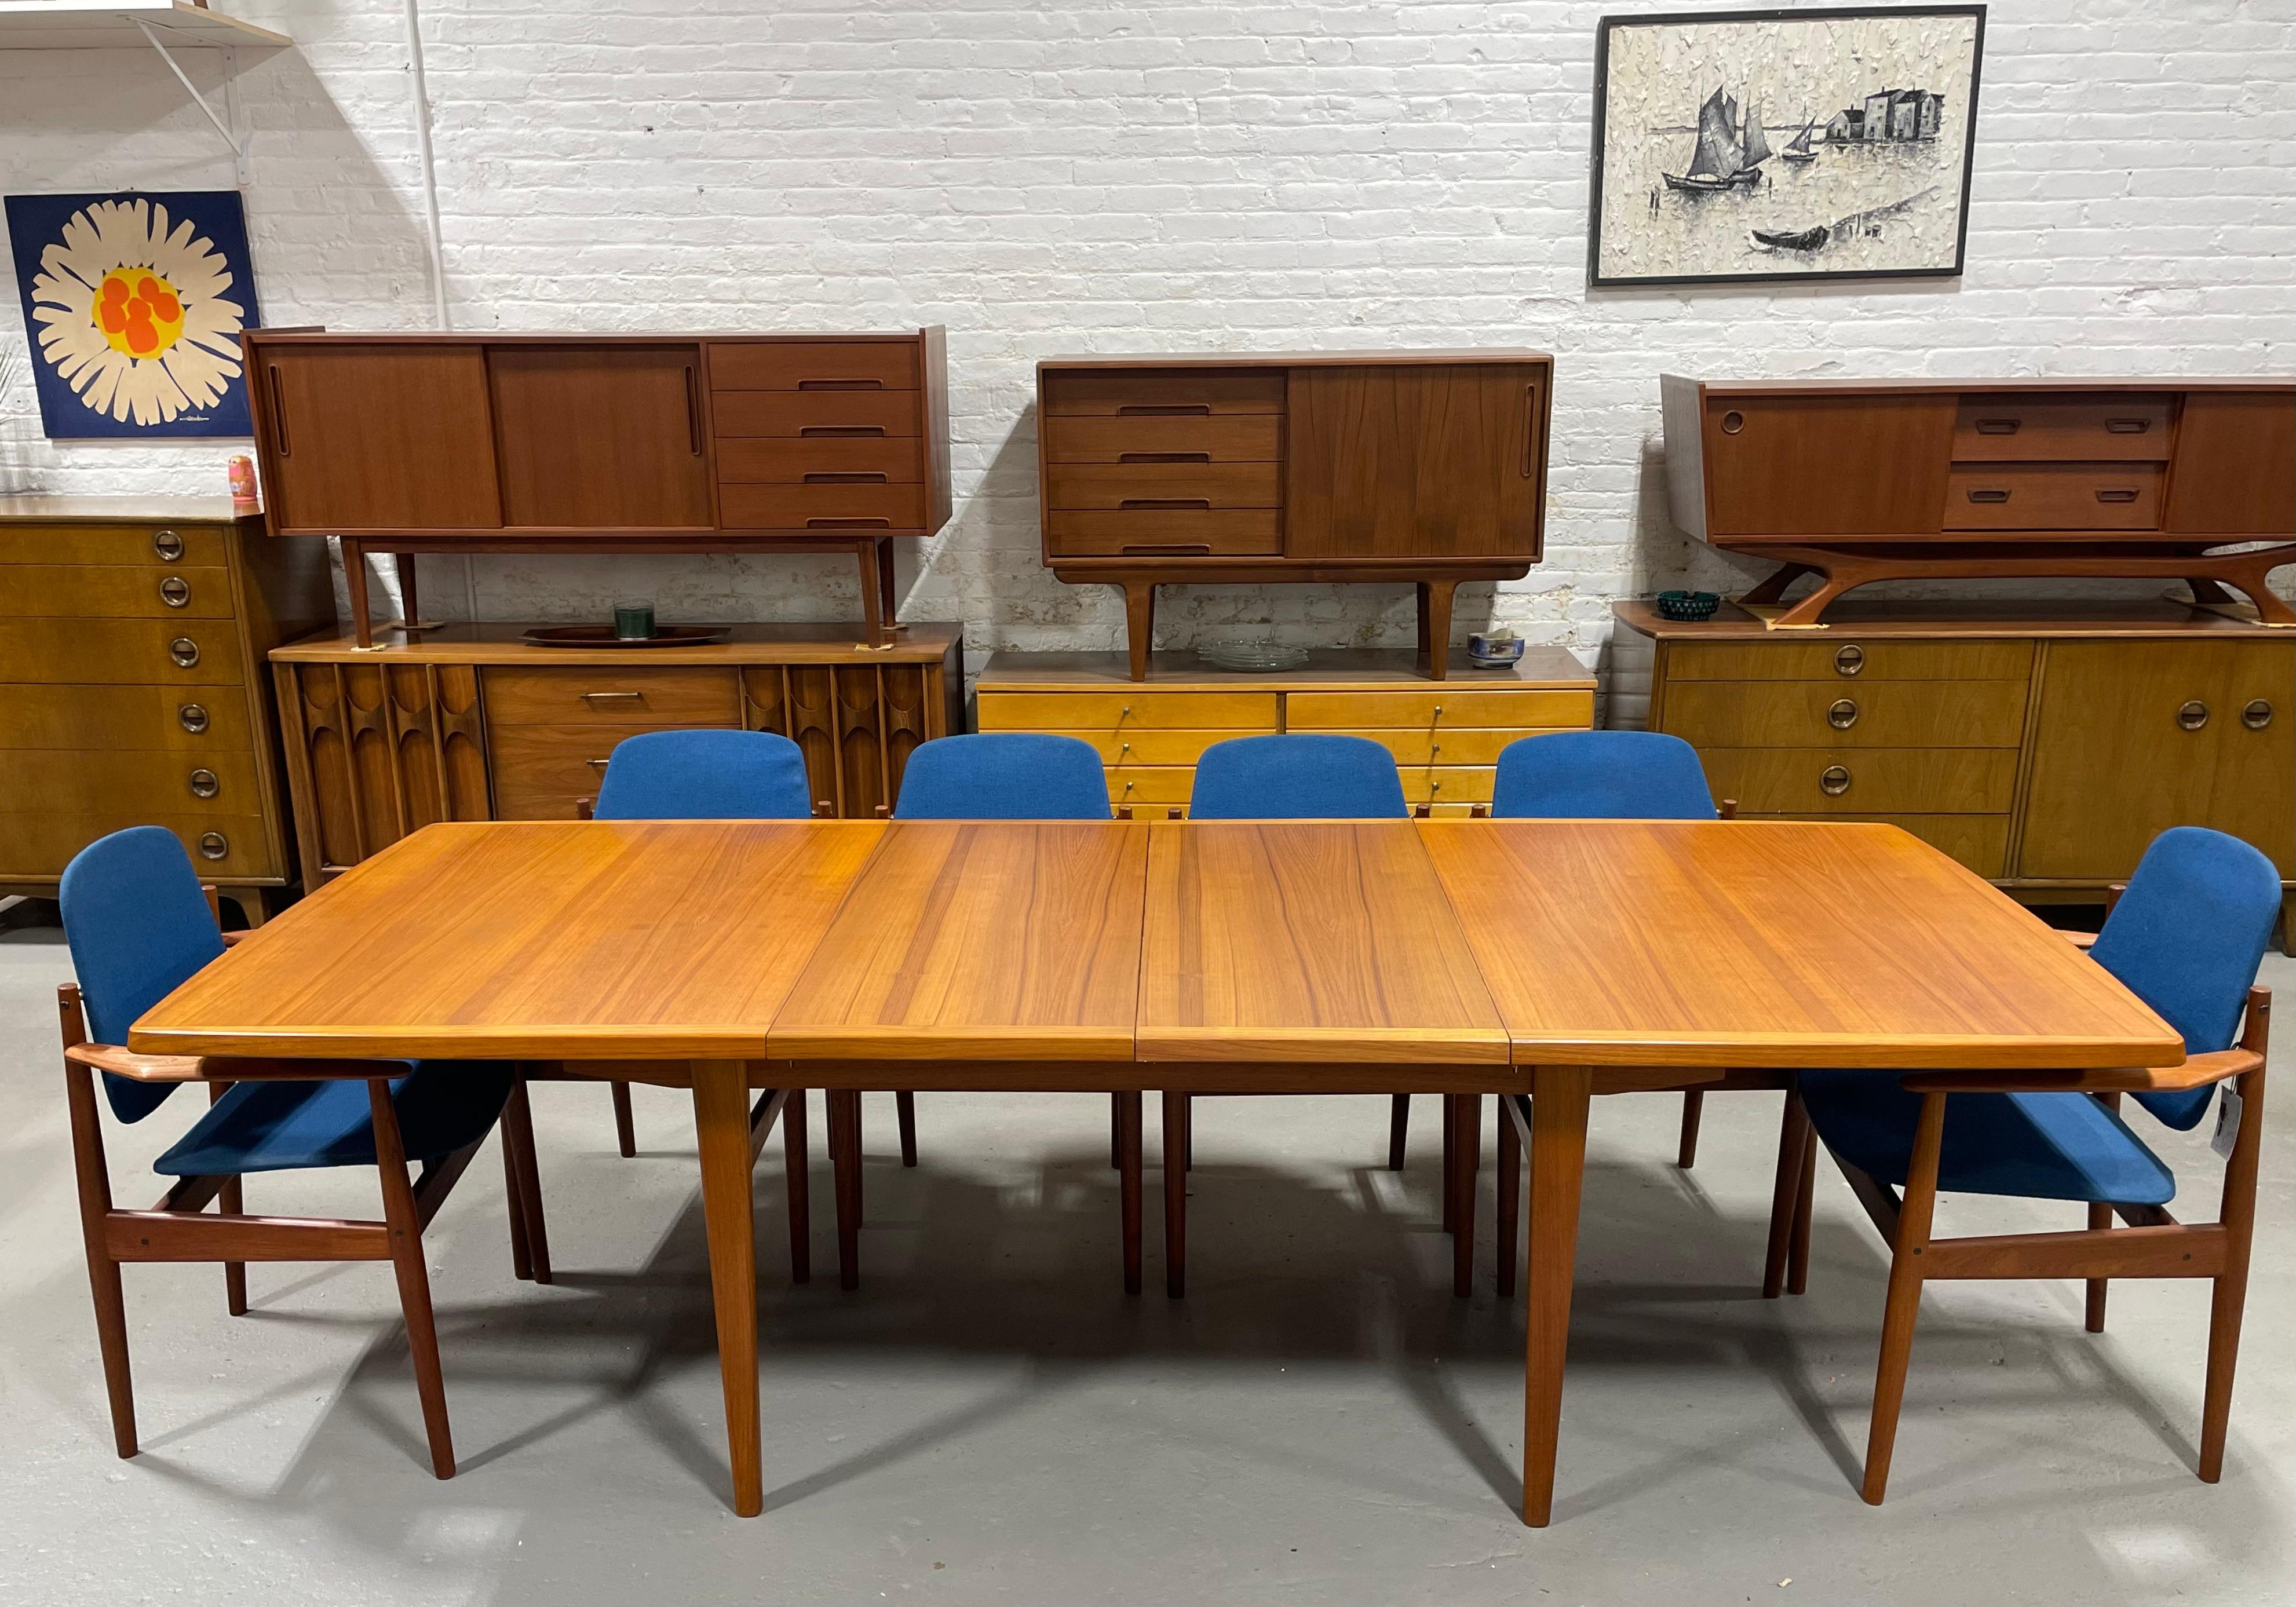 An exceptional Extra Long Mid Century Modern Expandable Teak dining table, circa 1960’s. This incredible table has beautiful wood grains and expands from 65” to either 83.5